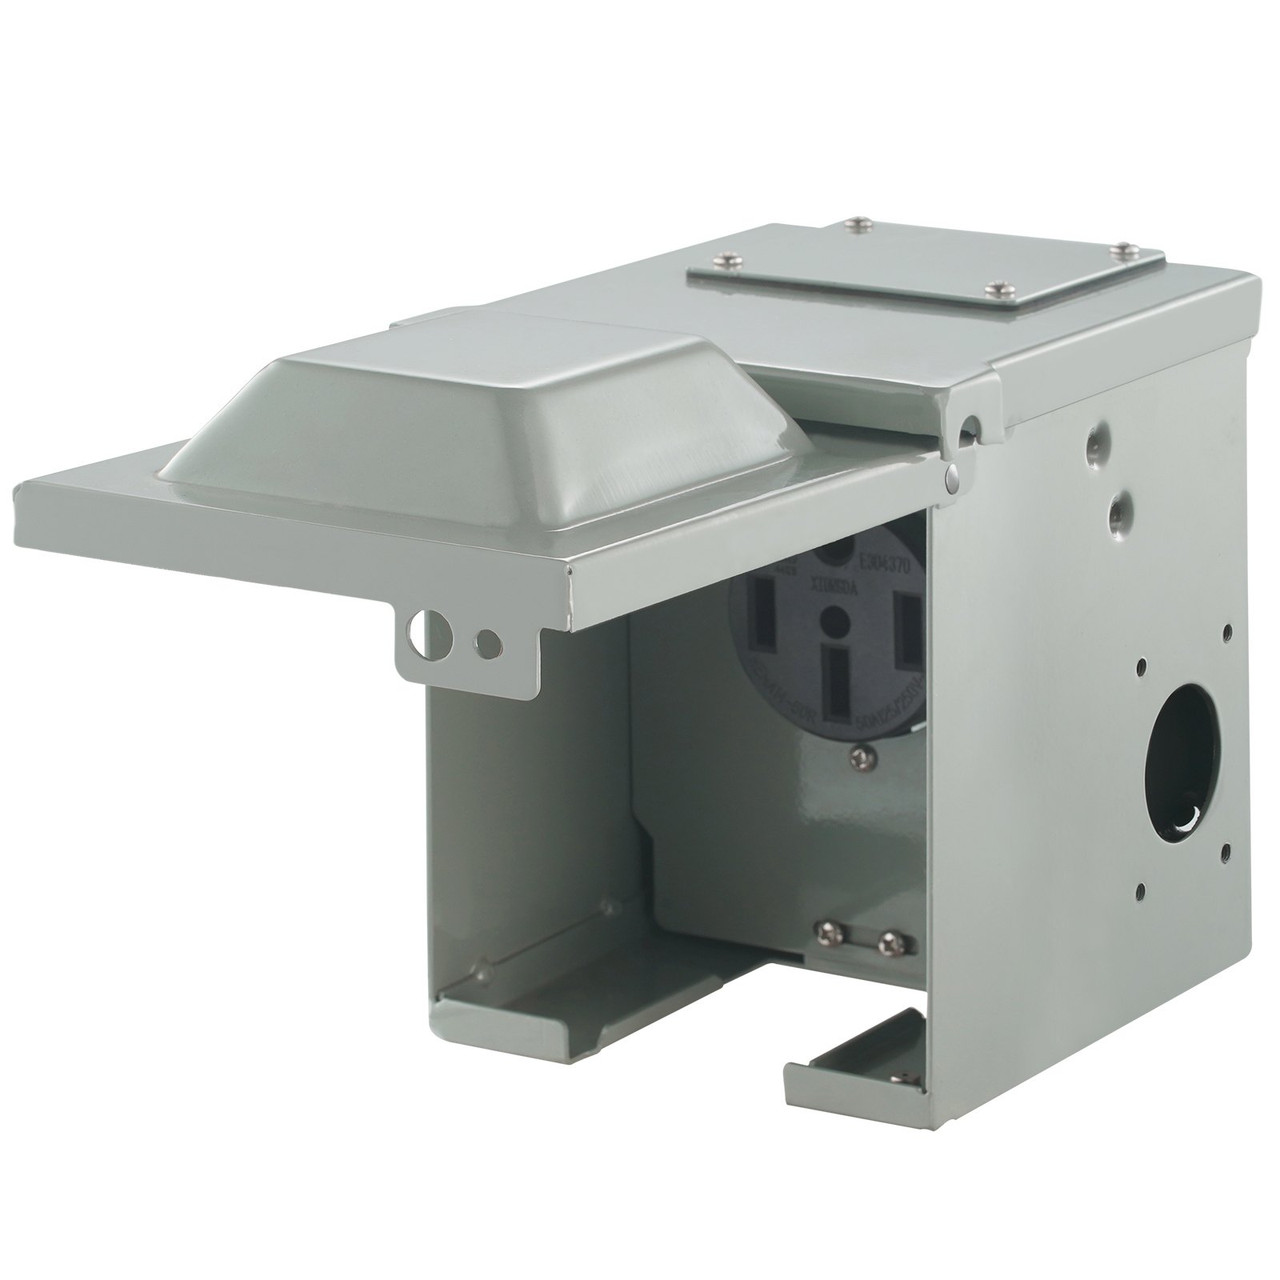  WELLUCK RV Power Outlet Box, 50A 125/250V, NEMA 14-50R  Receptacle, Enclosed & Lockable